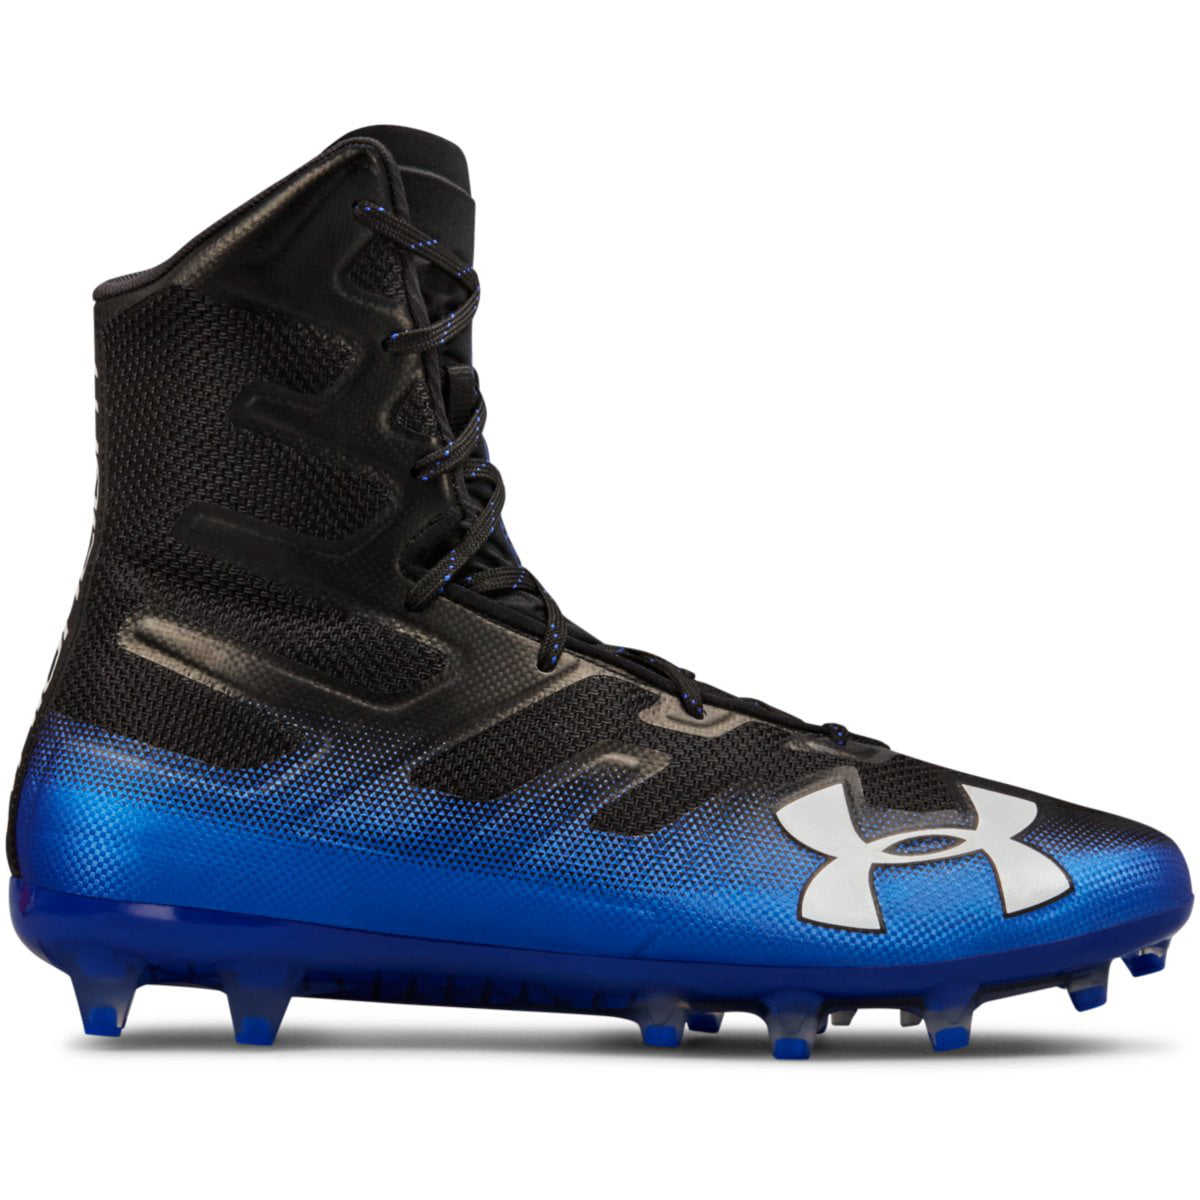 Under Armour Highlight Royal/White Football Cleats 3000413-400 